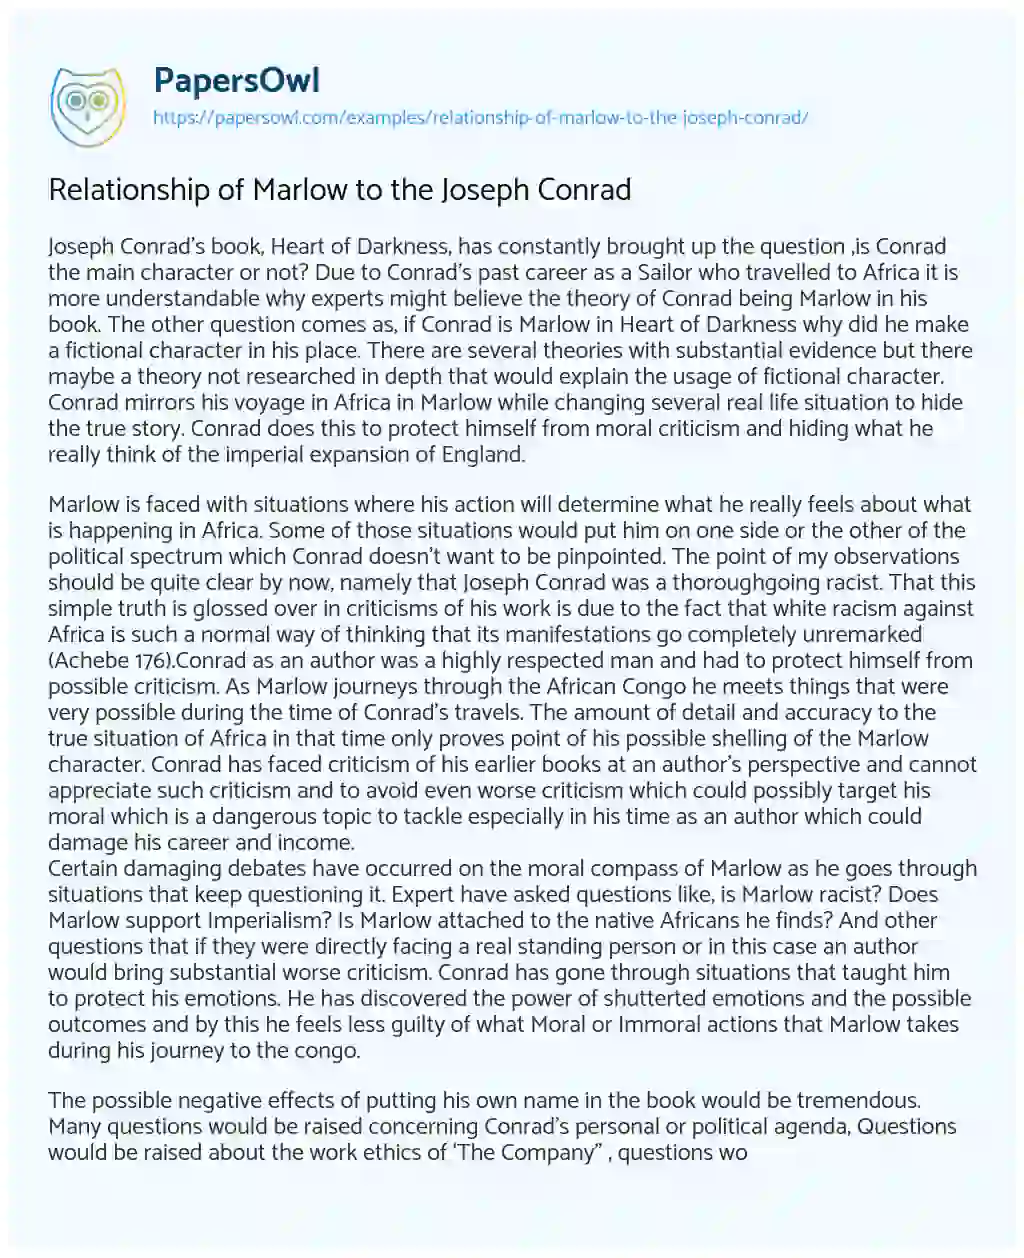 Essay on Relationship of Marlow to the Joseph Conrad